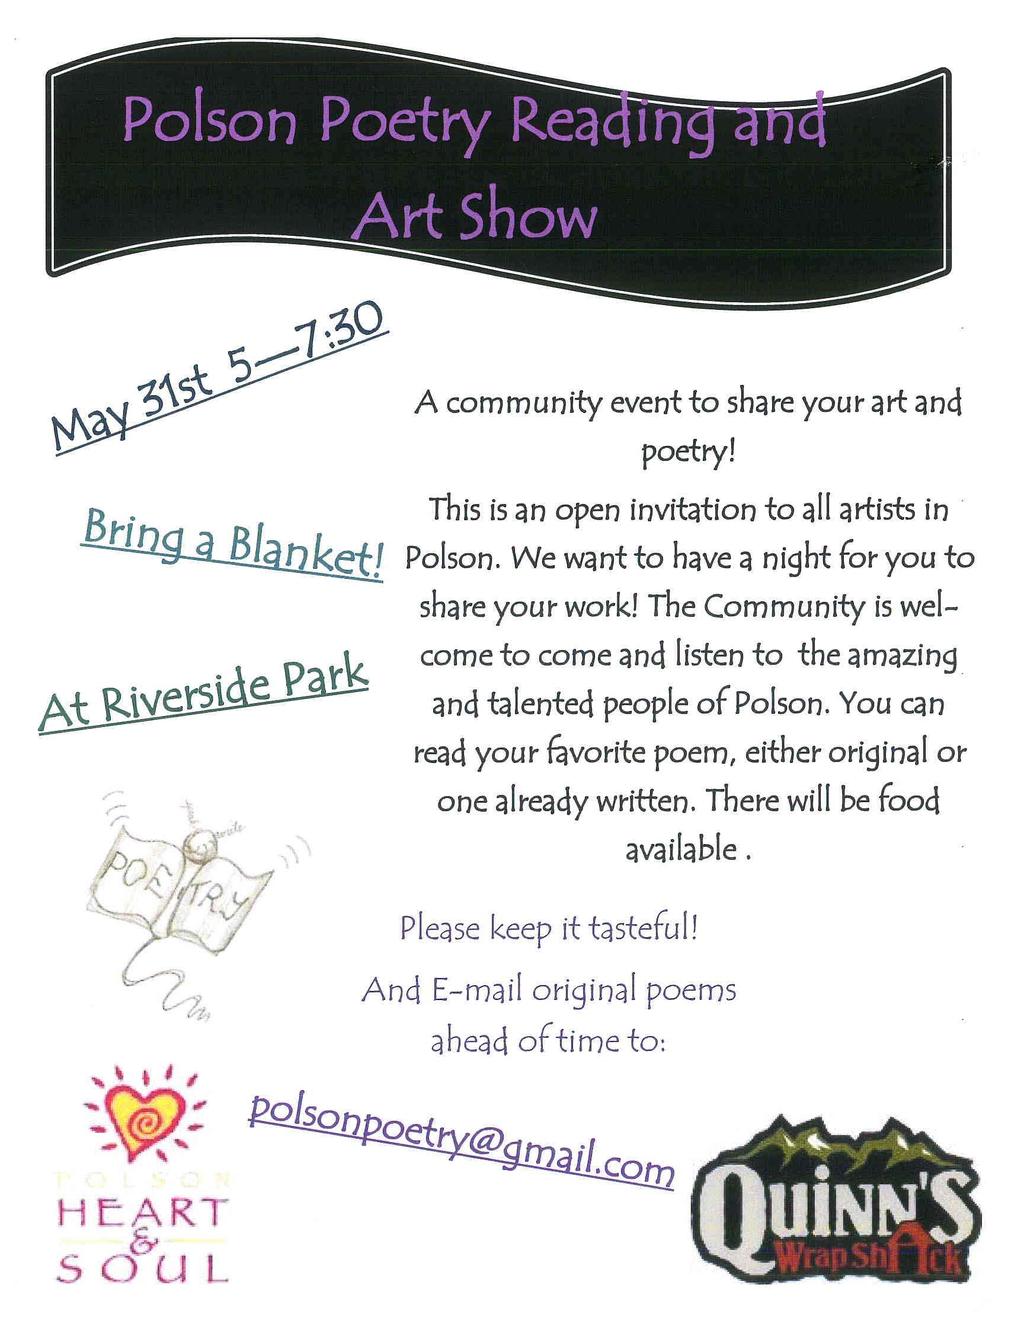 B' - t"lng a Blank tl e!. A community event to share your art an~ poetry! This is an open invitation to all artists in. Polson. We want to have a night for you to share your work!